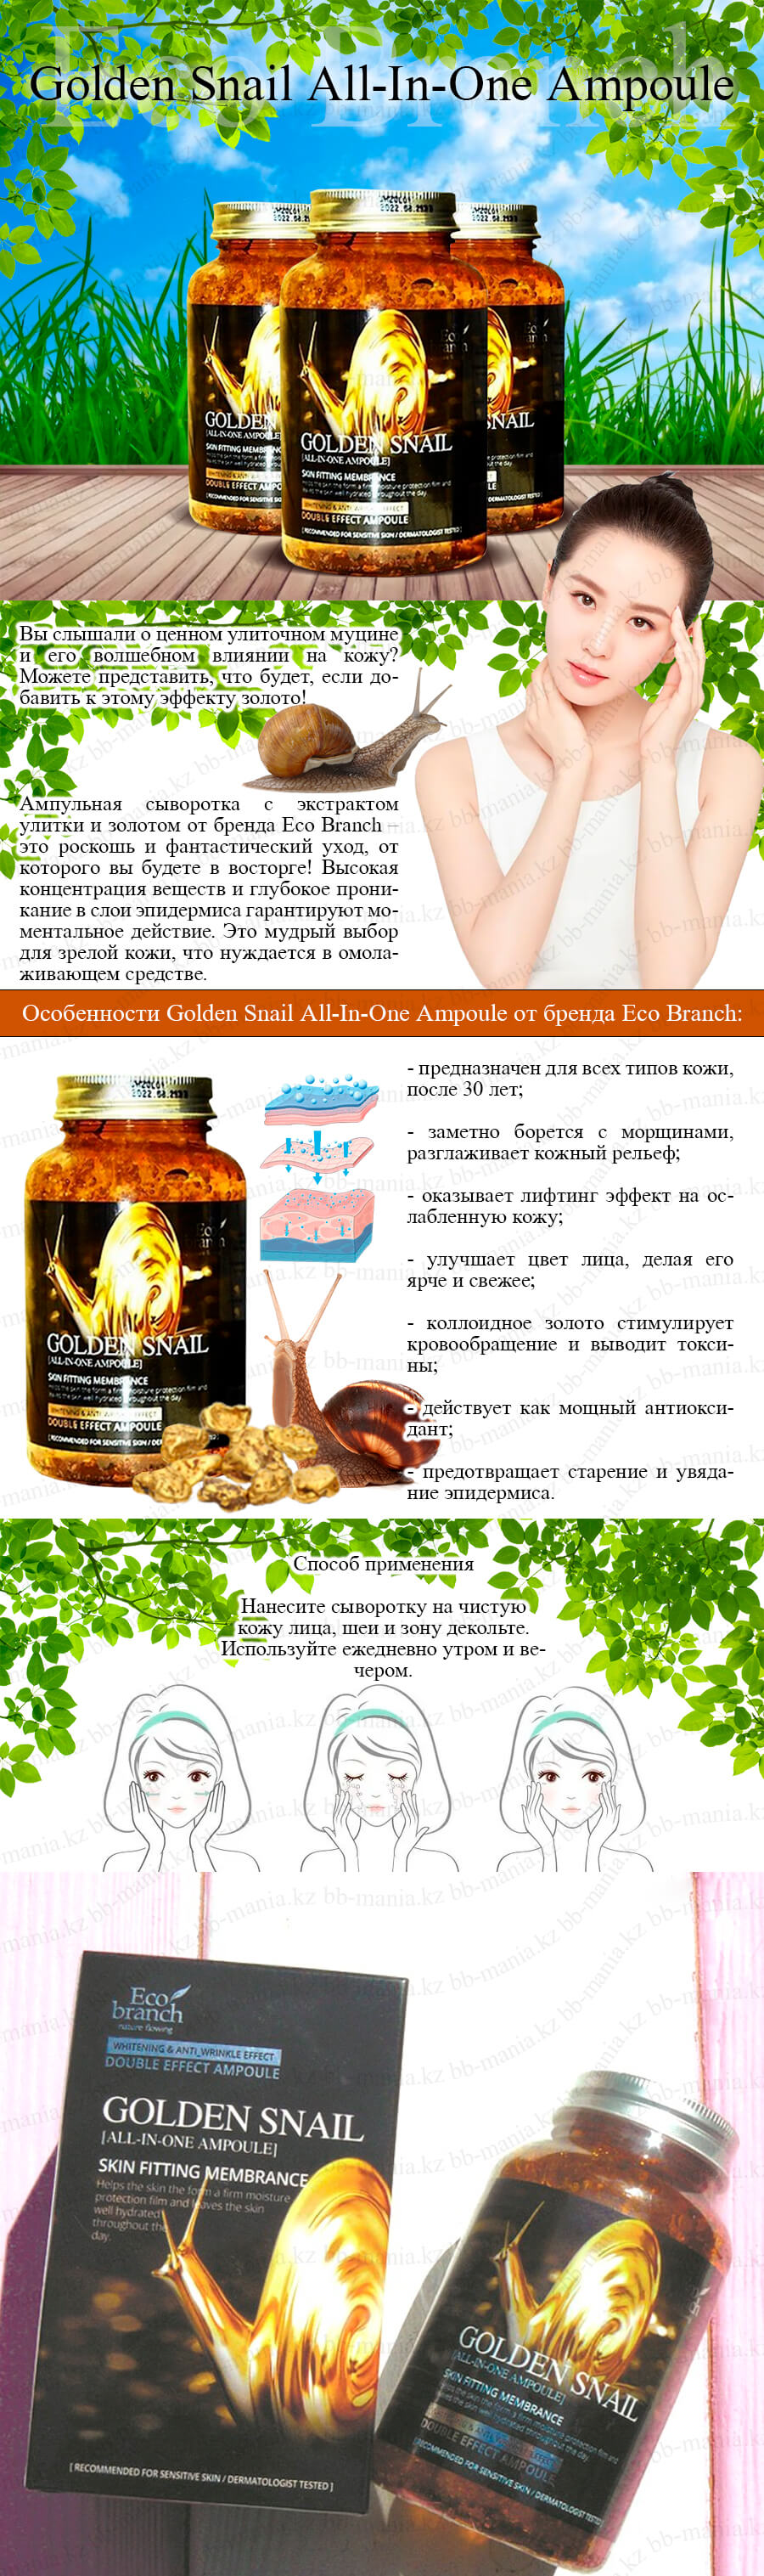 Golden-Snail-All-In-One-Ampoule-[Eco-Branch]